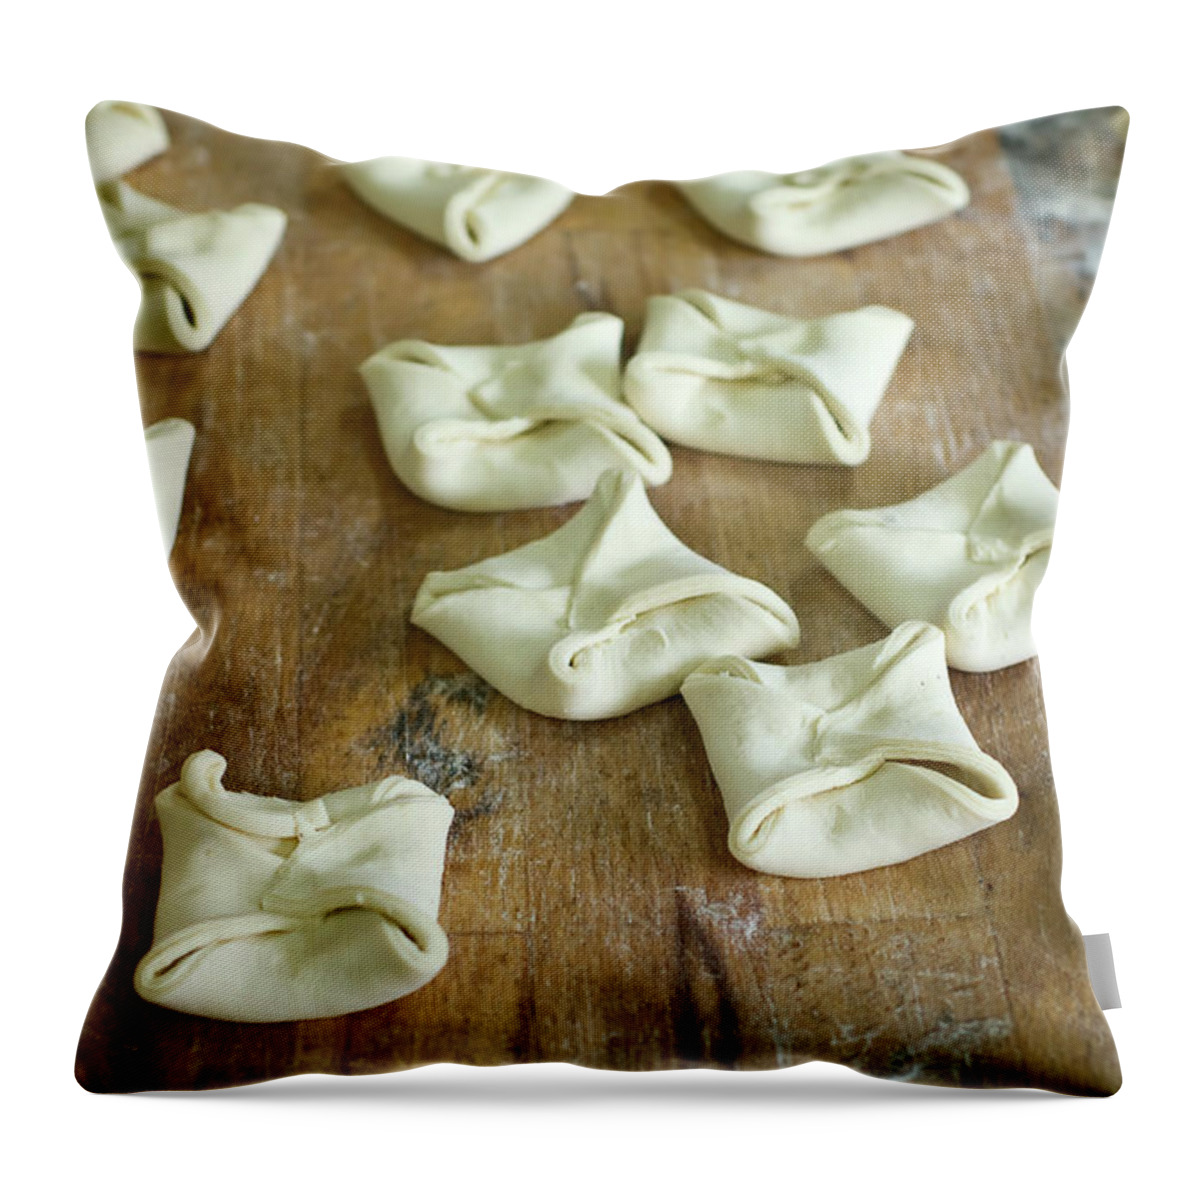 Bakery Throw Pillow featuring the photograph Making Pastries by Richard Clark